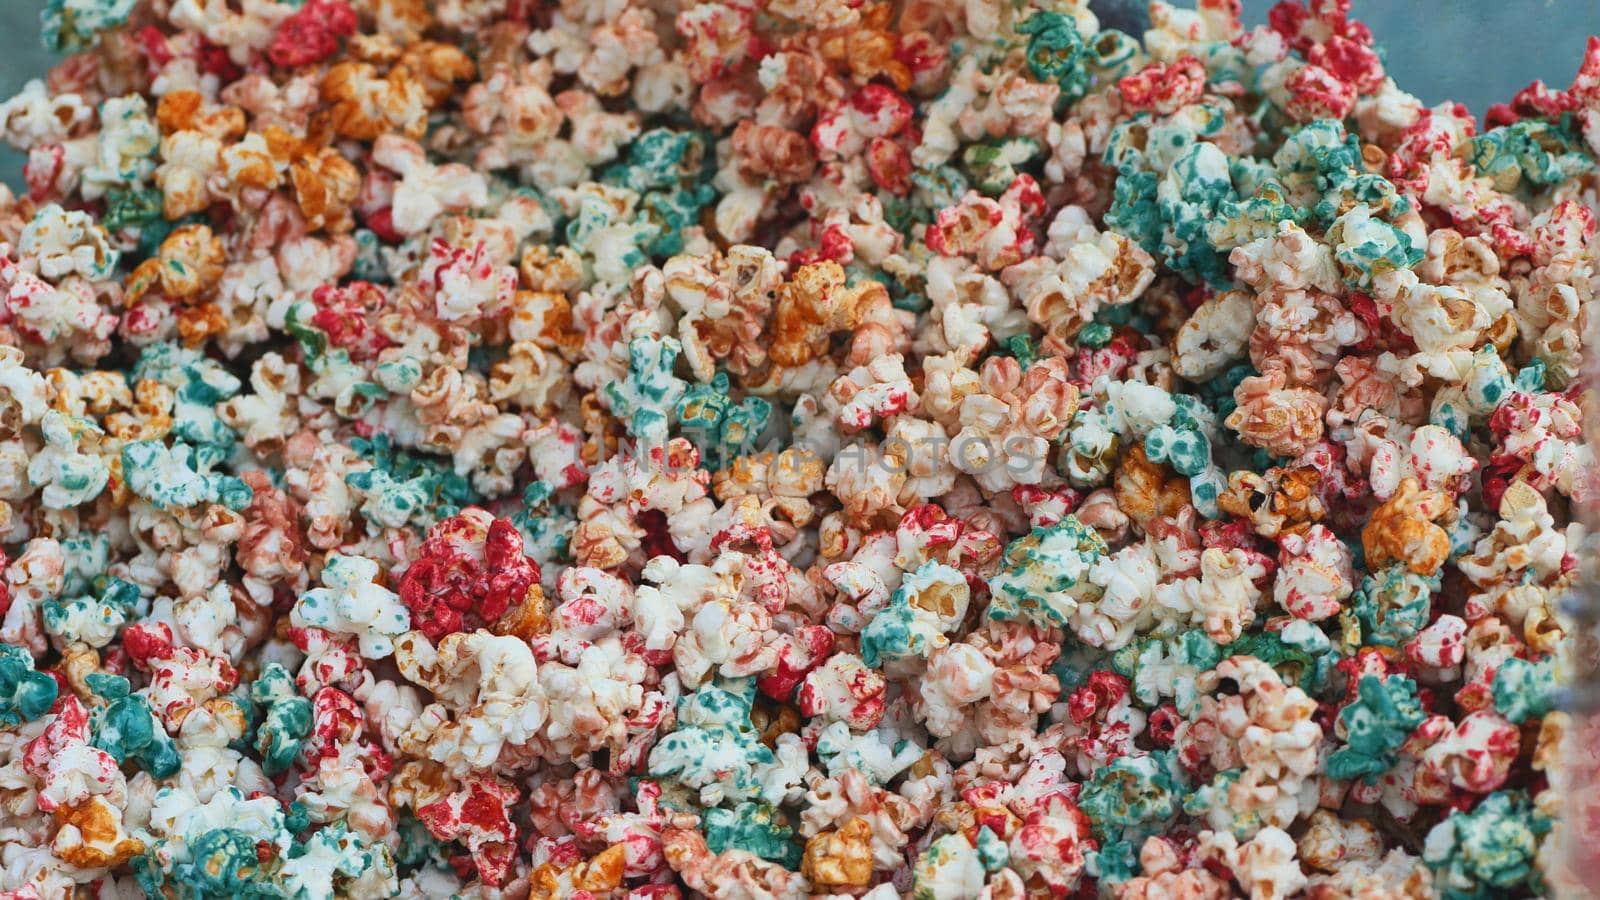 Colored and delicious fried popcorn on the street. by DovidPro